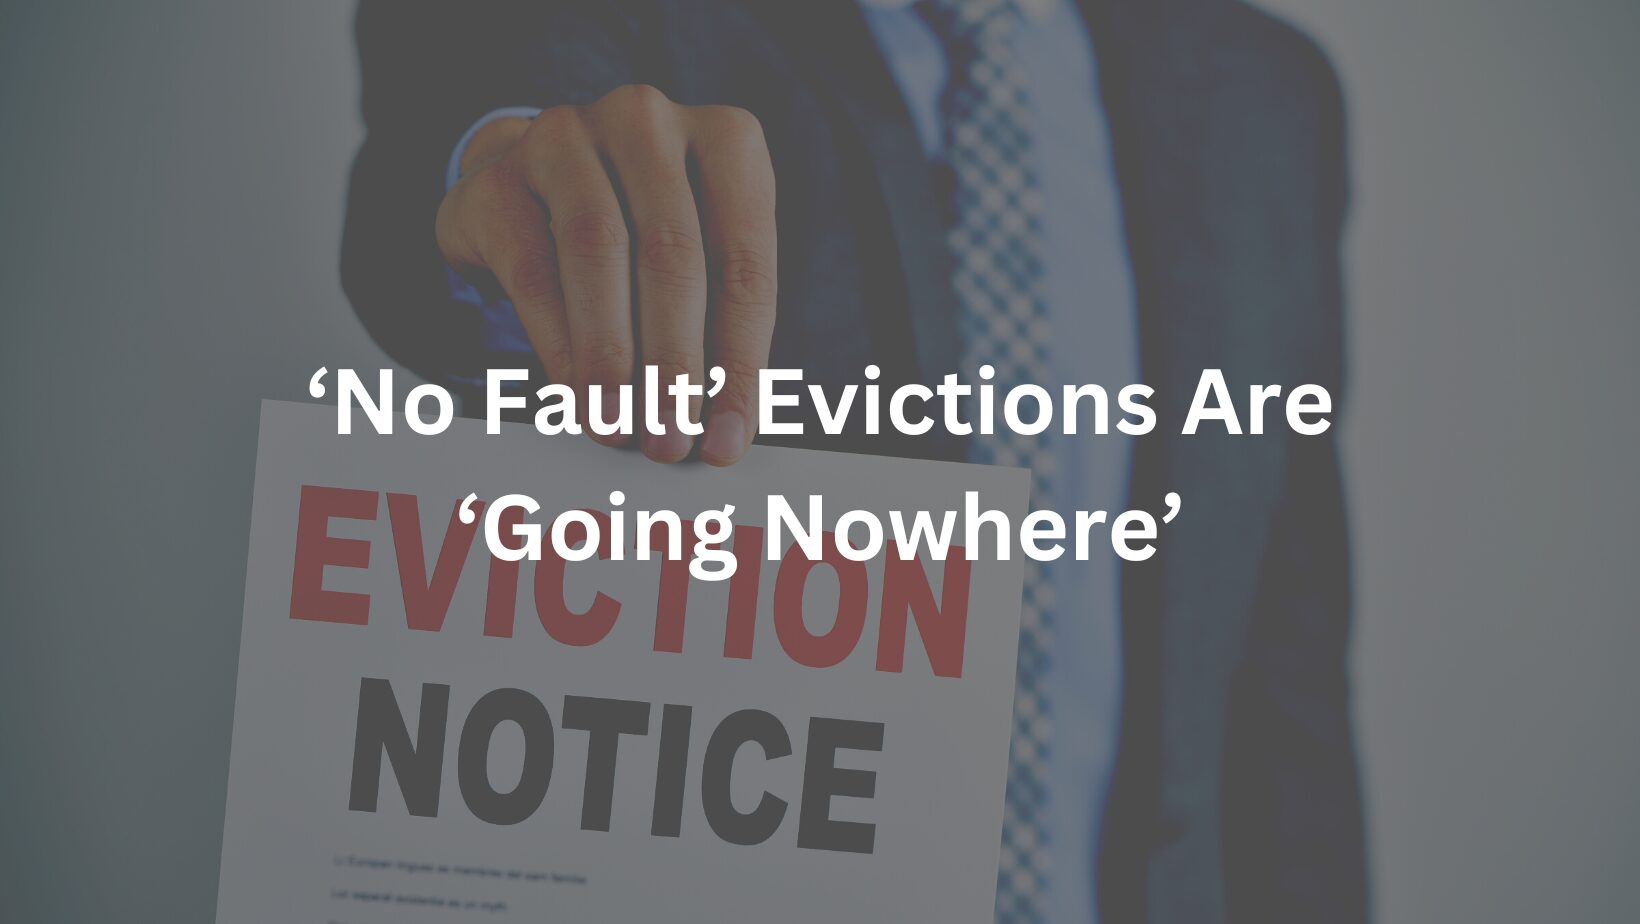 ‘No Fault’ Evictions Are ‘Going Nowhere’